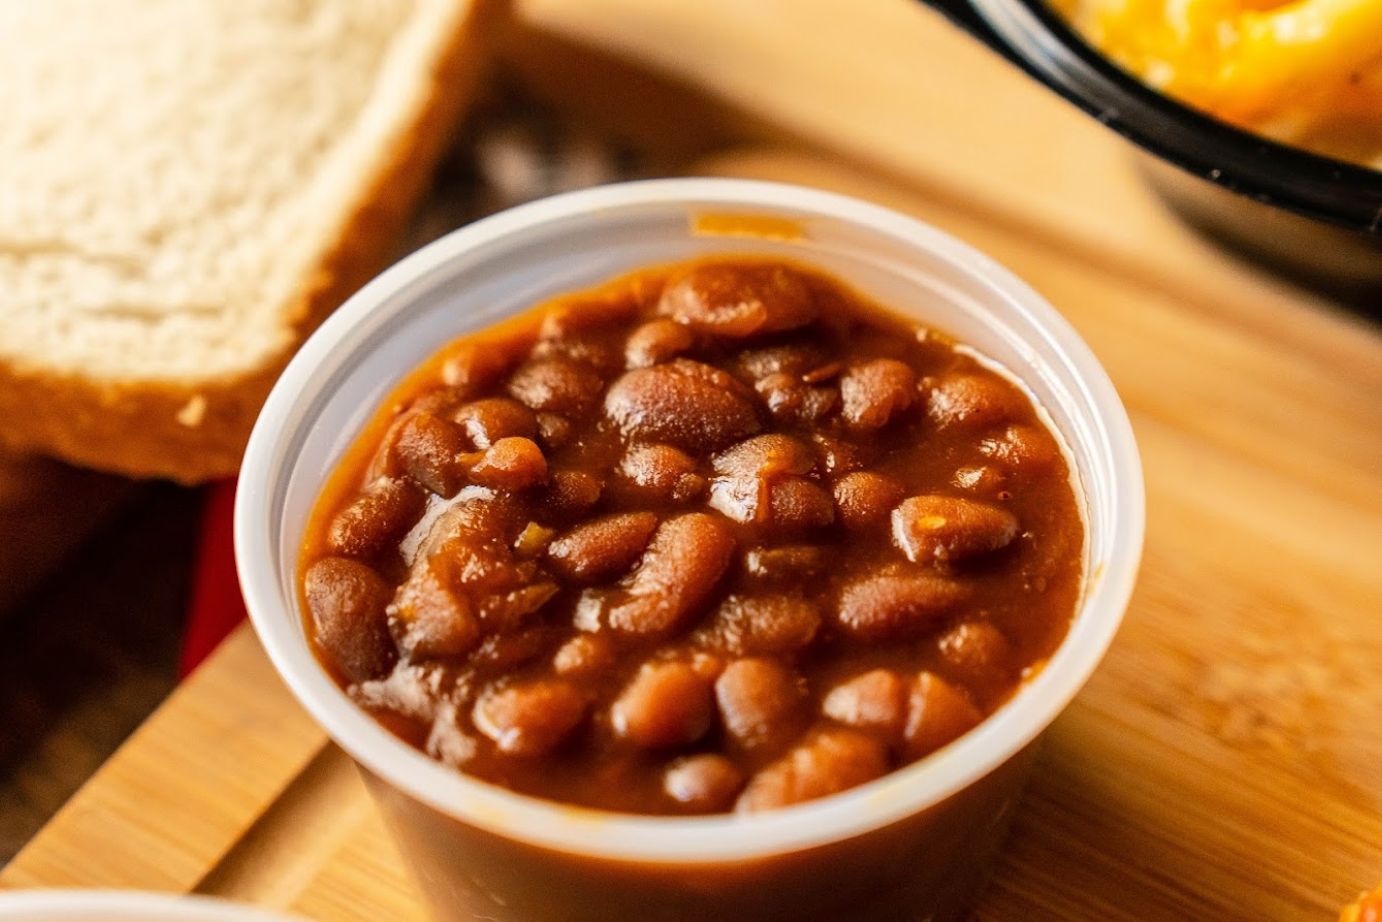 Side of baked beans